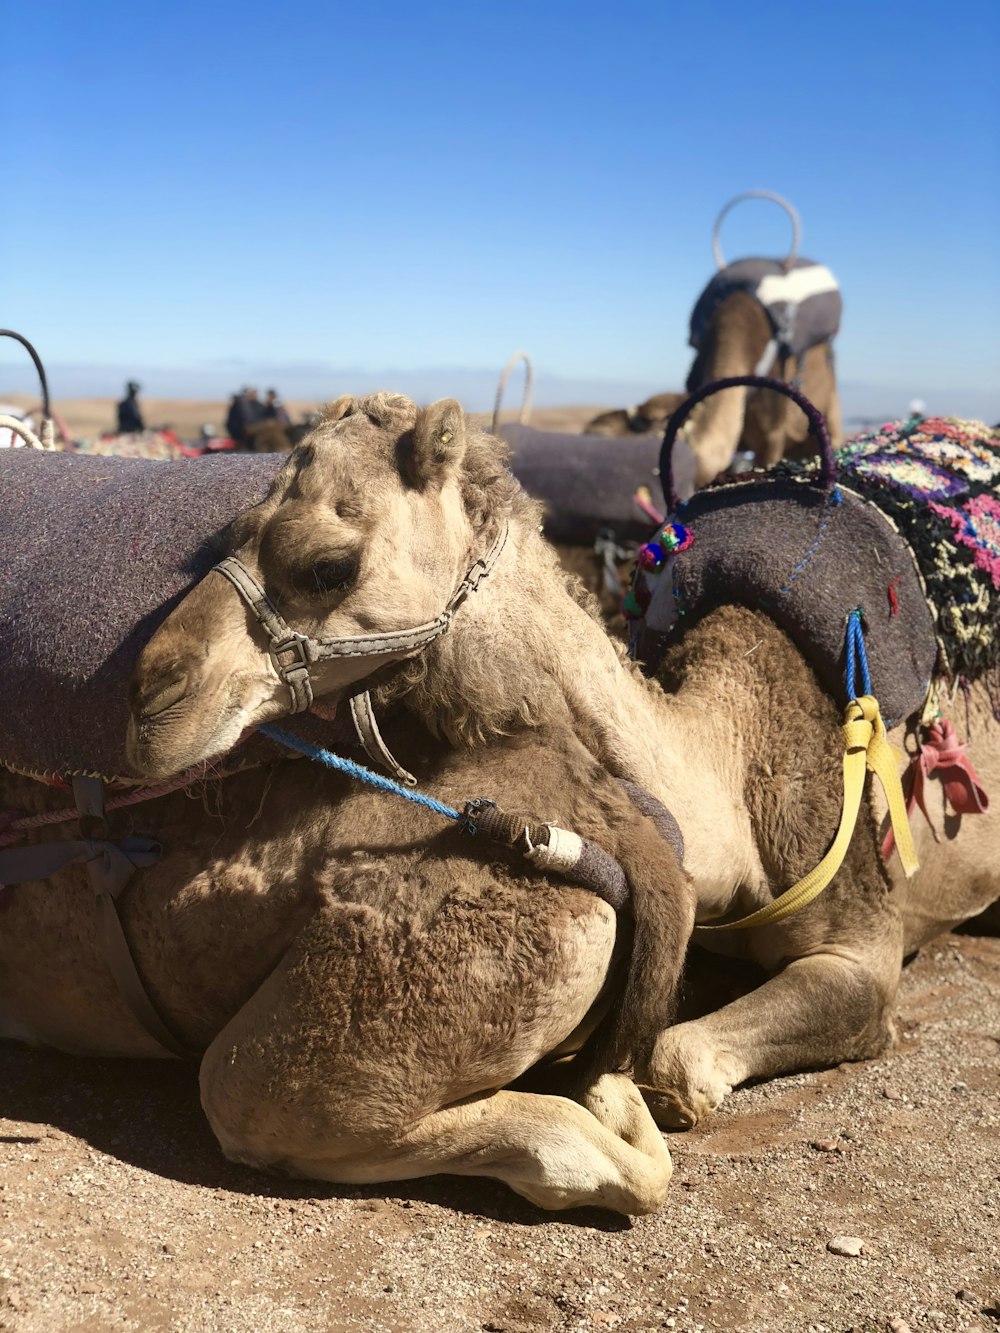 brown camel lying on brown ground under blue sky